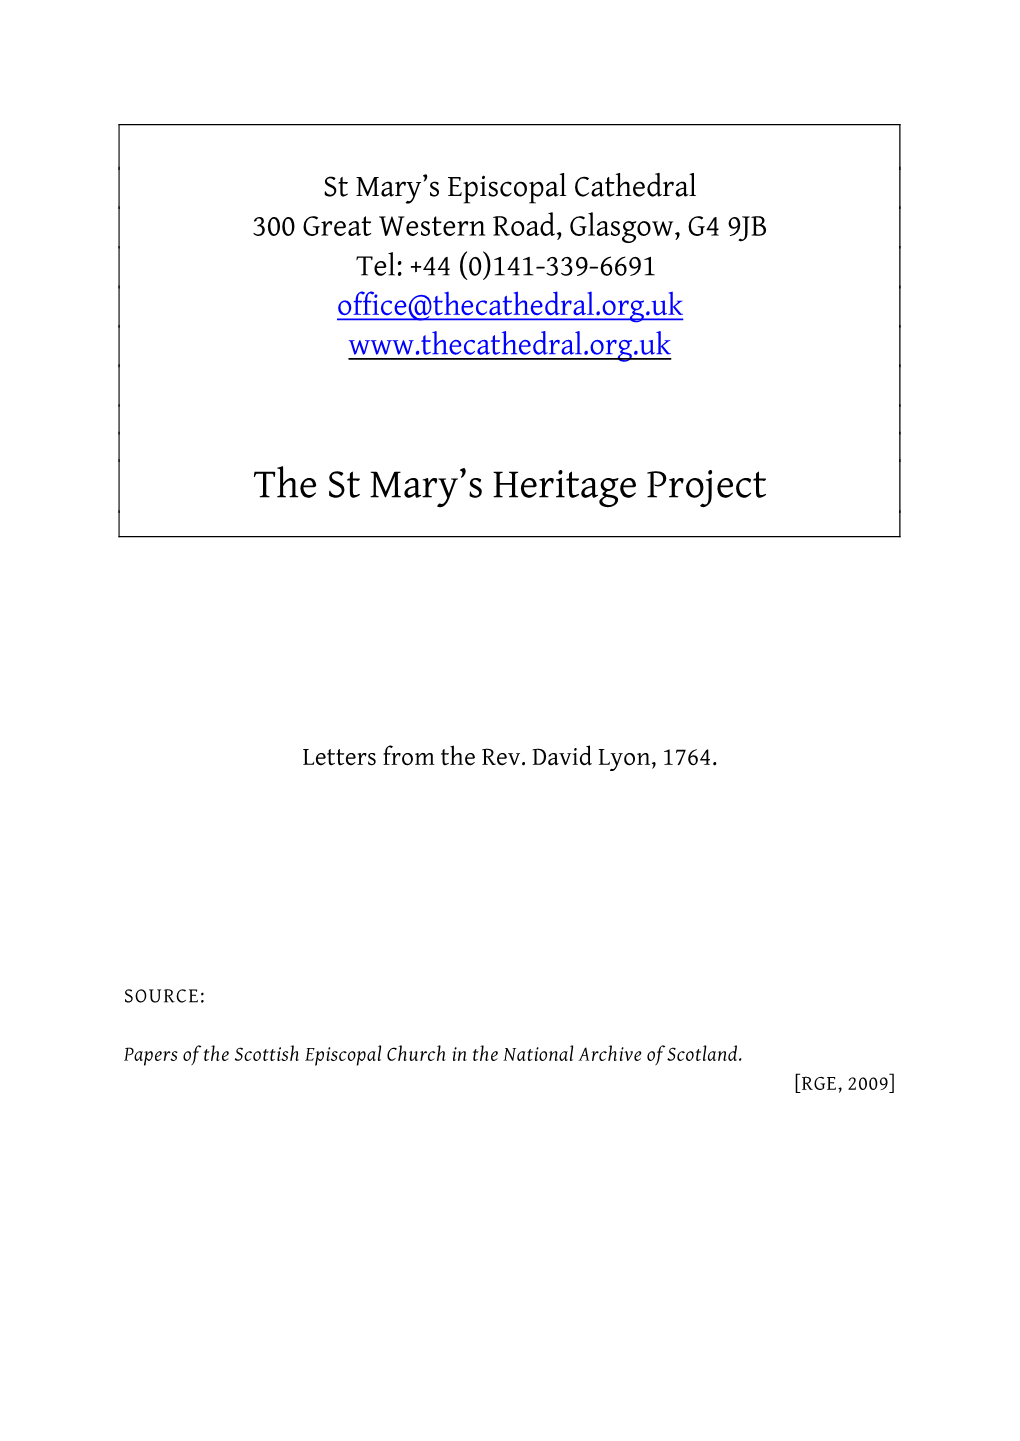 The St Mary's Heritage Project